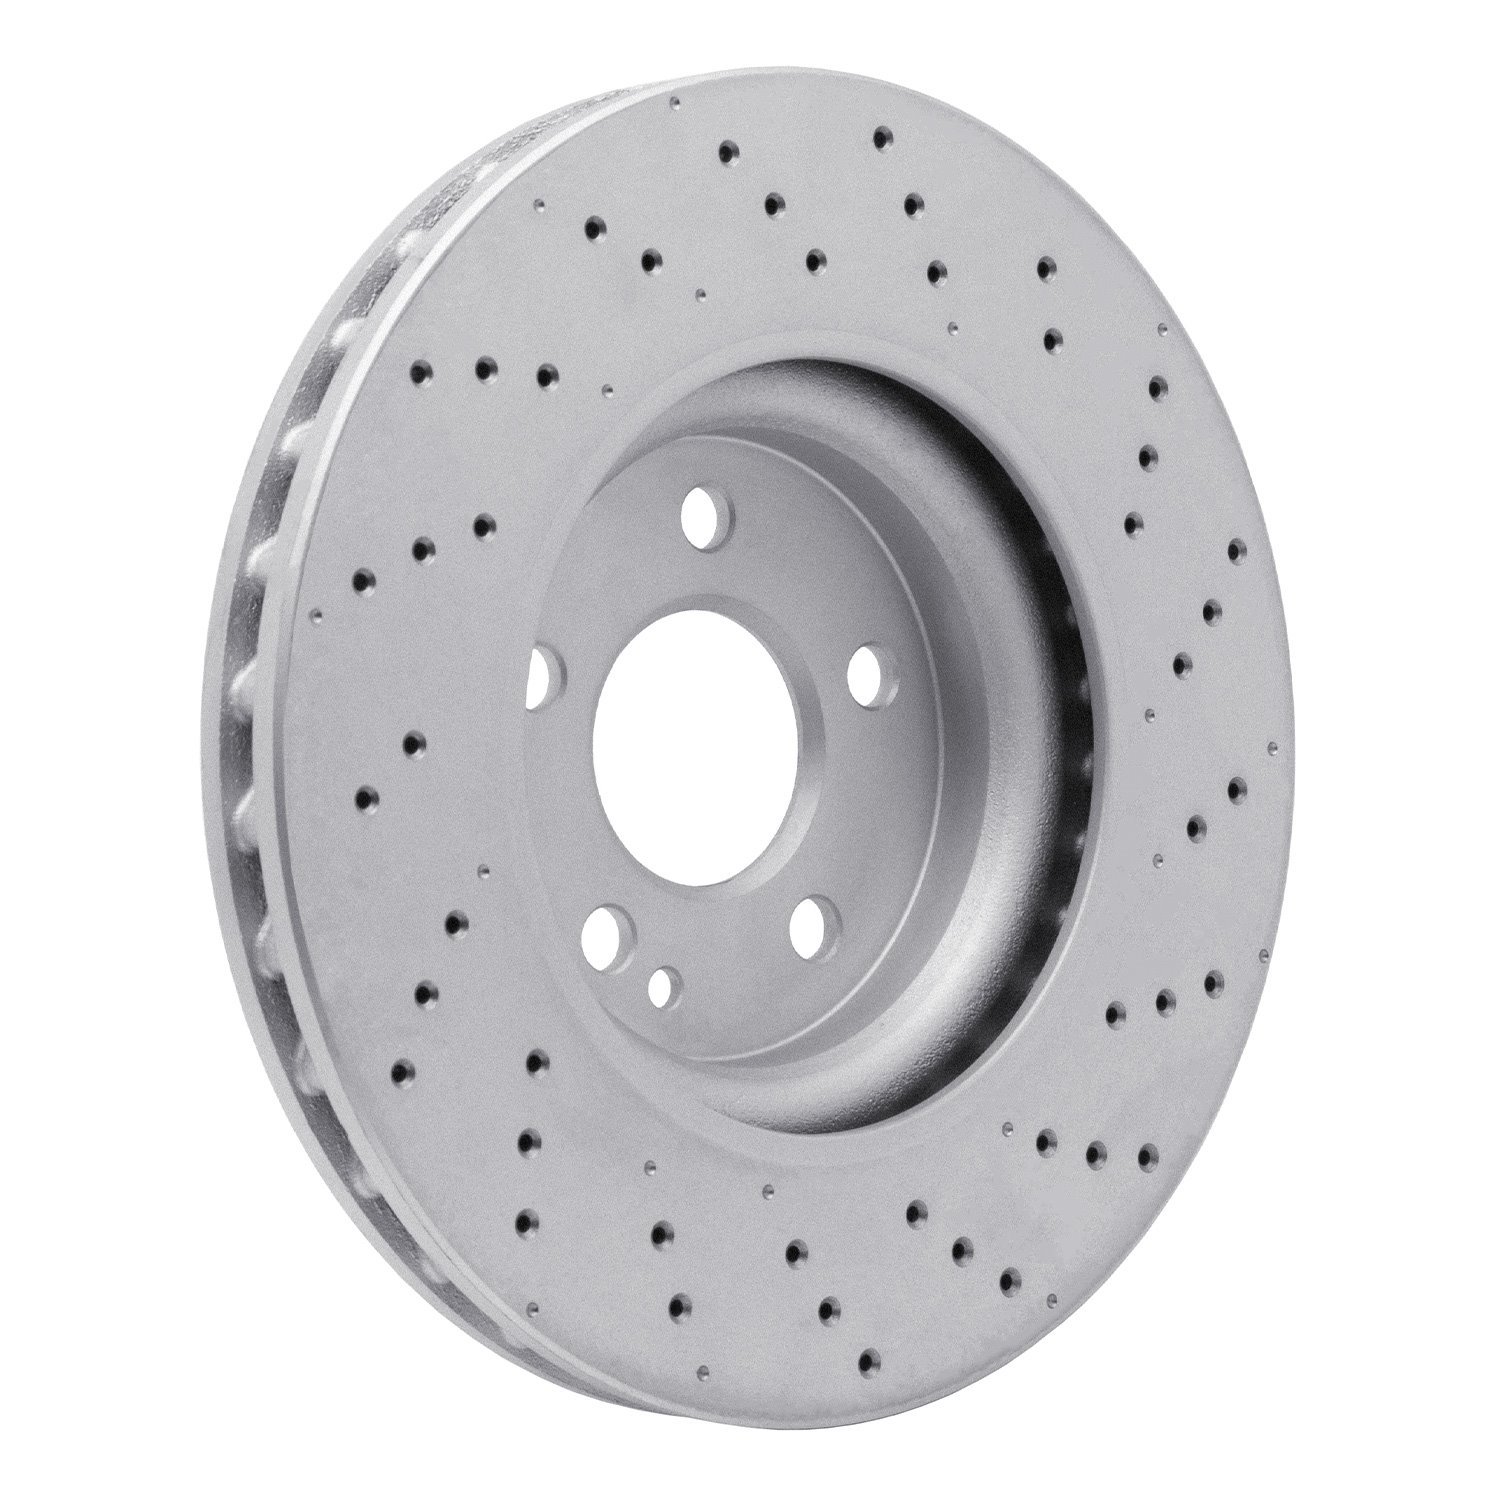 Hi-Carbon Alloy Geomet-Coated Drilled Rotor, 2014-2020 Fits